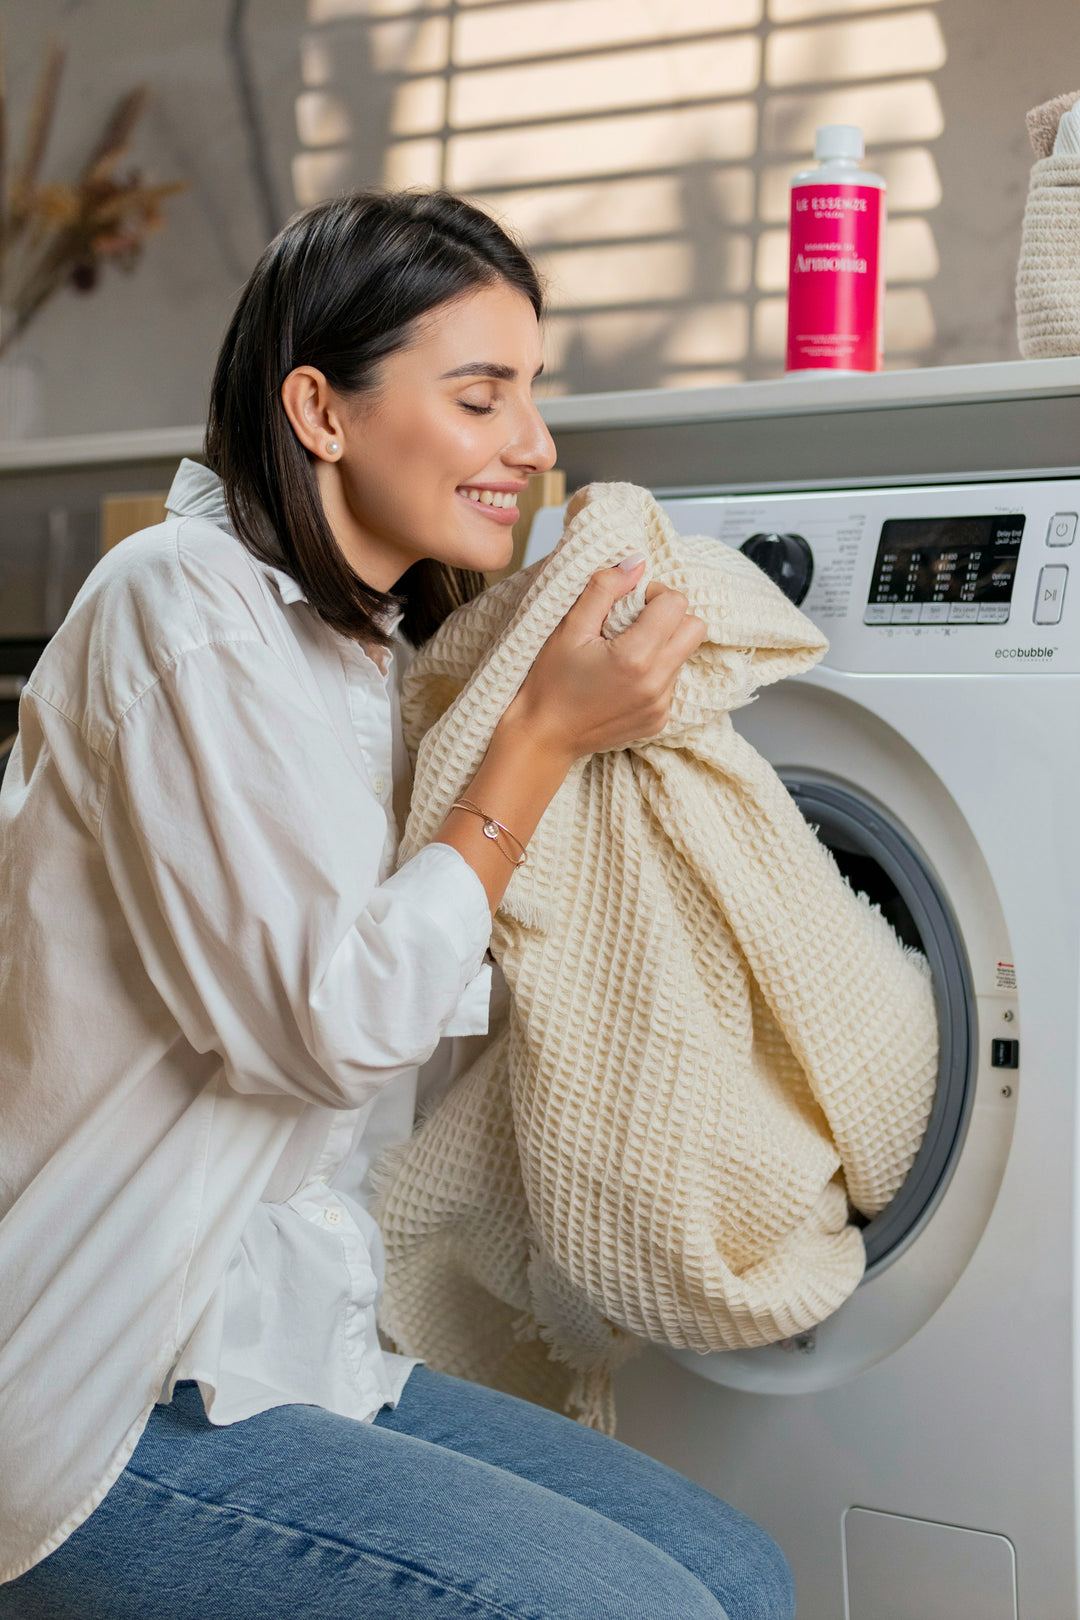 Revolutionize Your Laundry Routine with 100 Sheets of Eco-friendly  Ultra Concentrated Laundry Detergent!